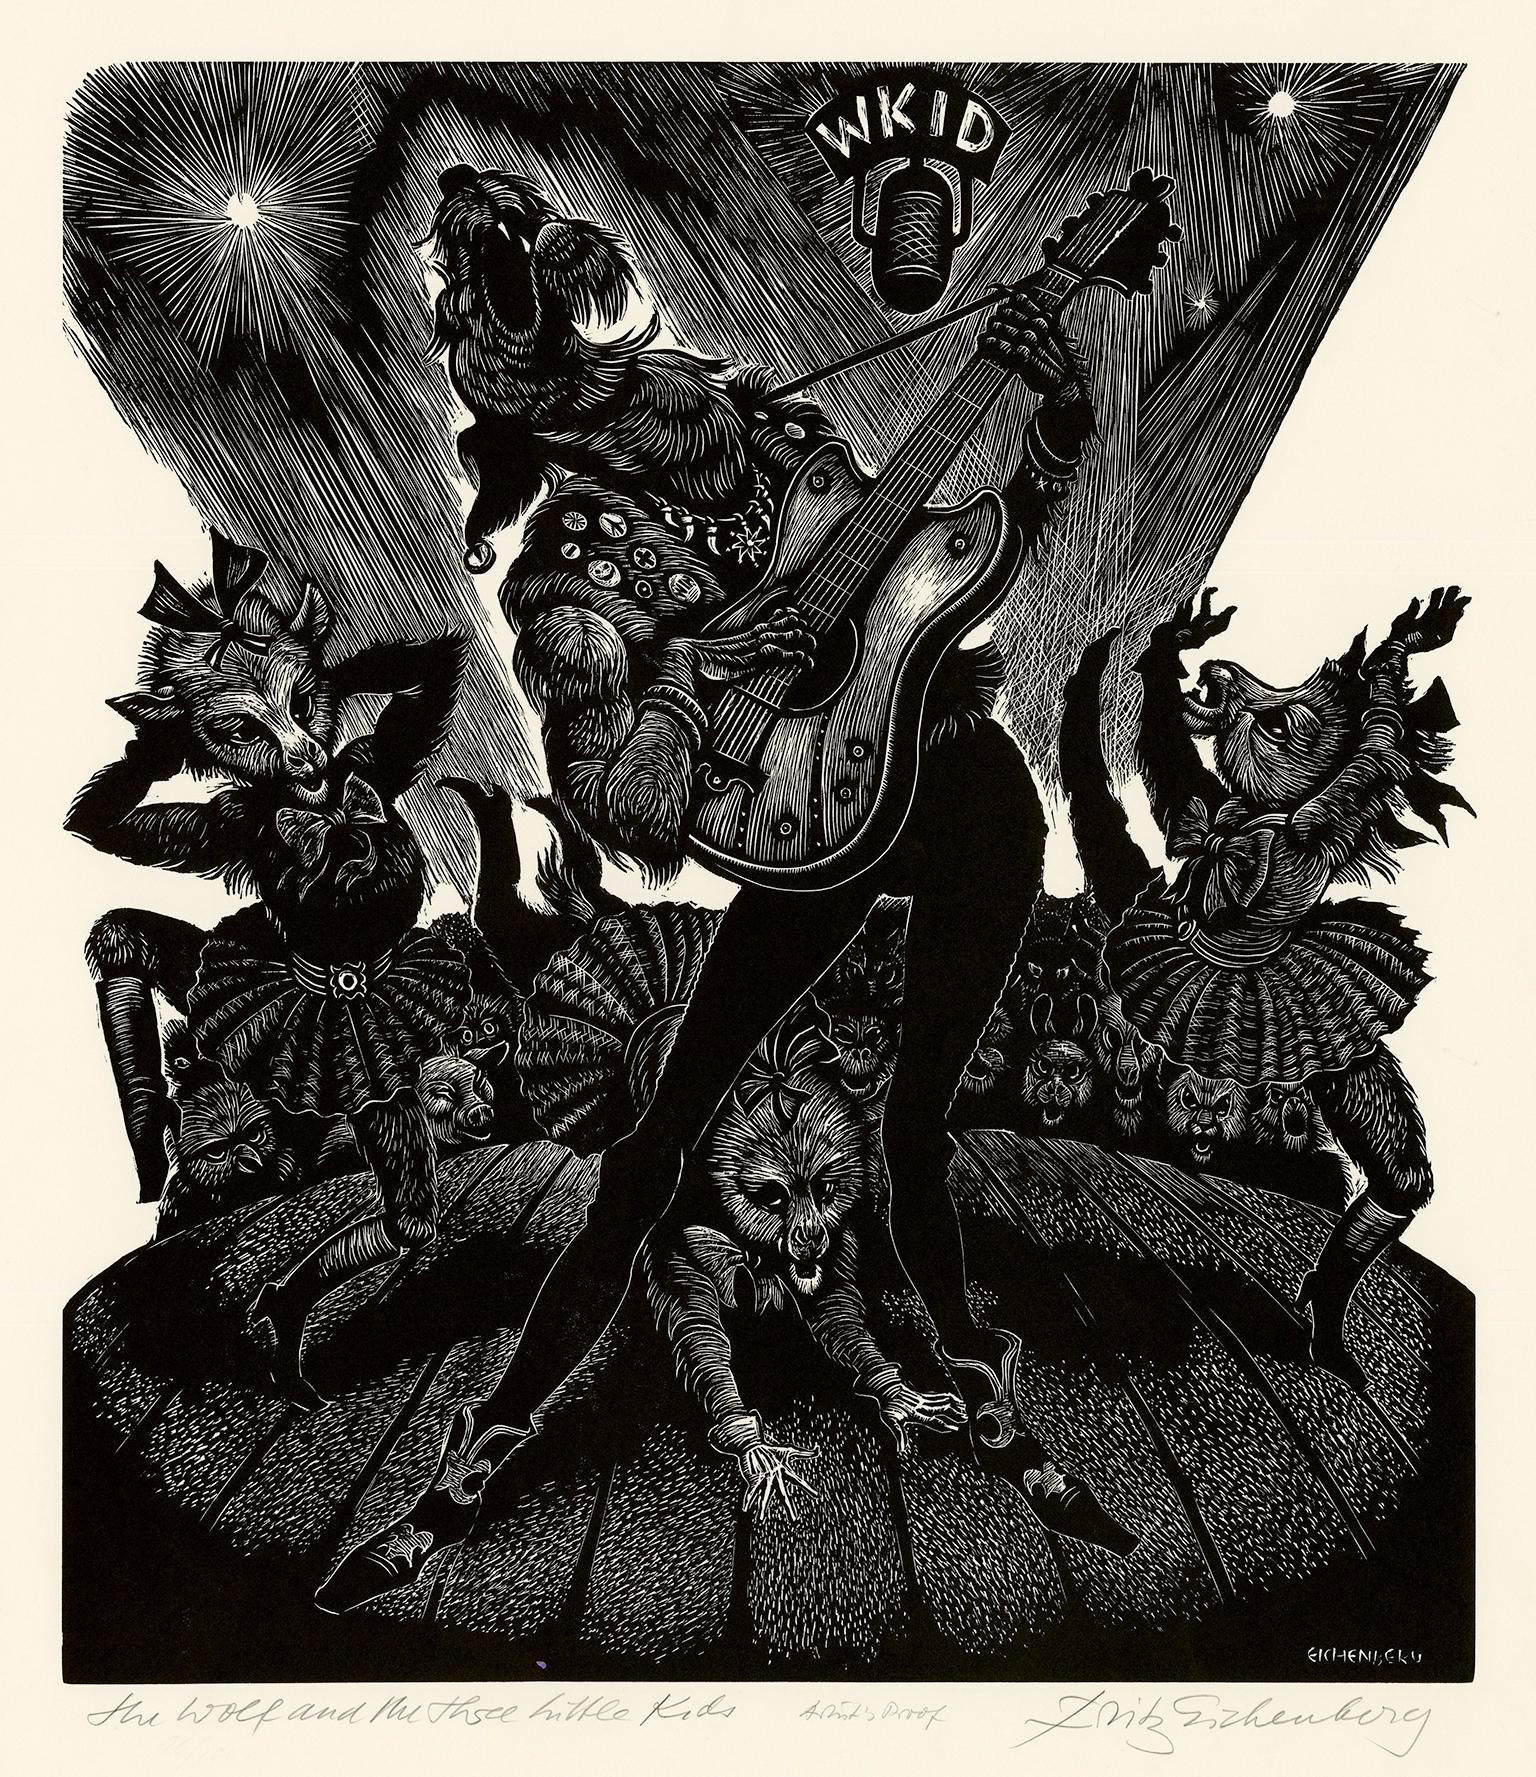 Fritz Eichenberg. Figurative Print - 'The Wolf and the Little Kids' — Graphic Modernism